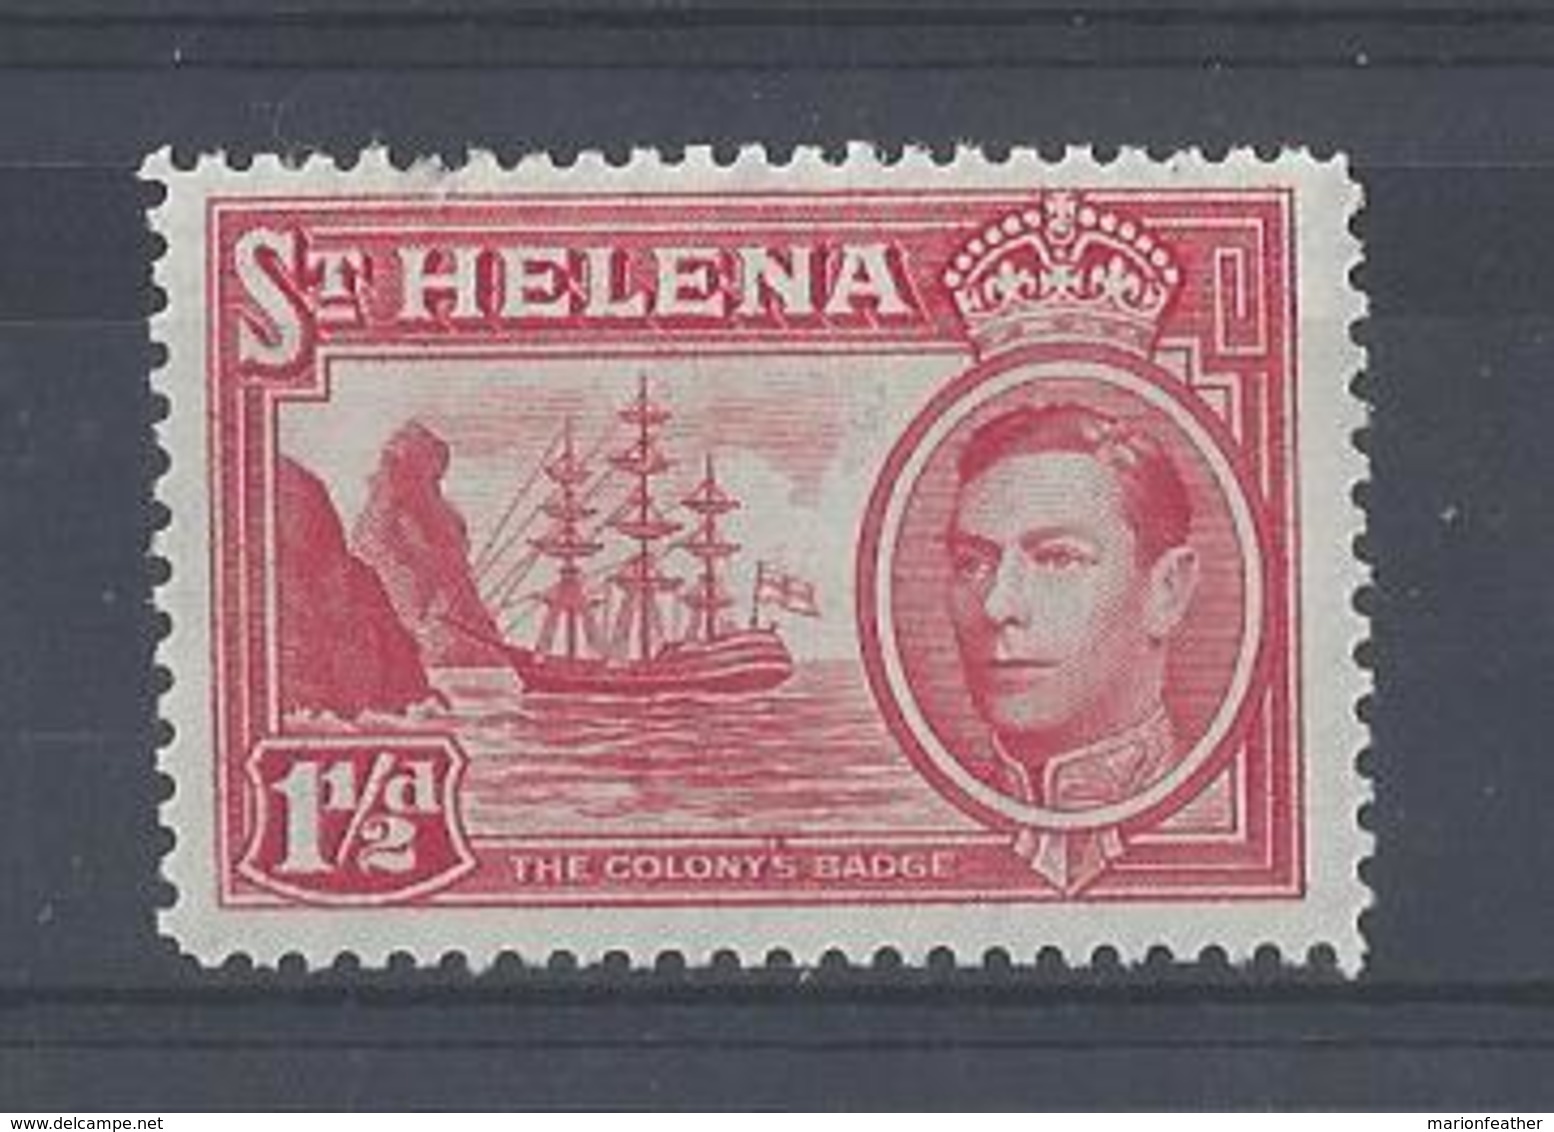 ST. HELENA ....KING GEORGE...VI..(1936-52.)......1 AND HALFd.........SG133.......SMALL TEAR ON TOP PERF......MH... - St. Helena